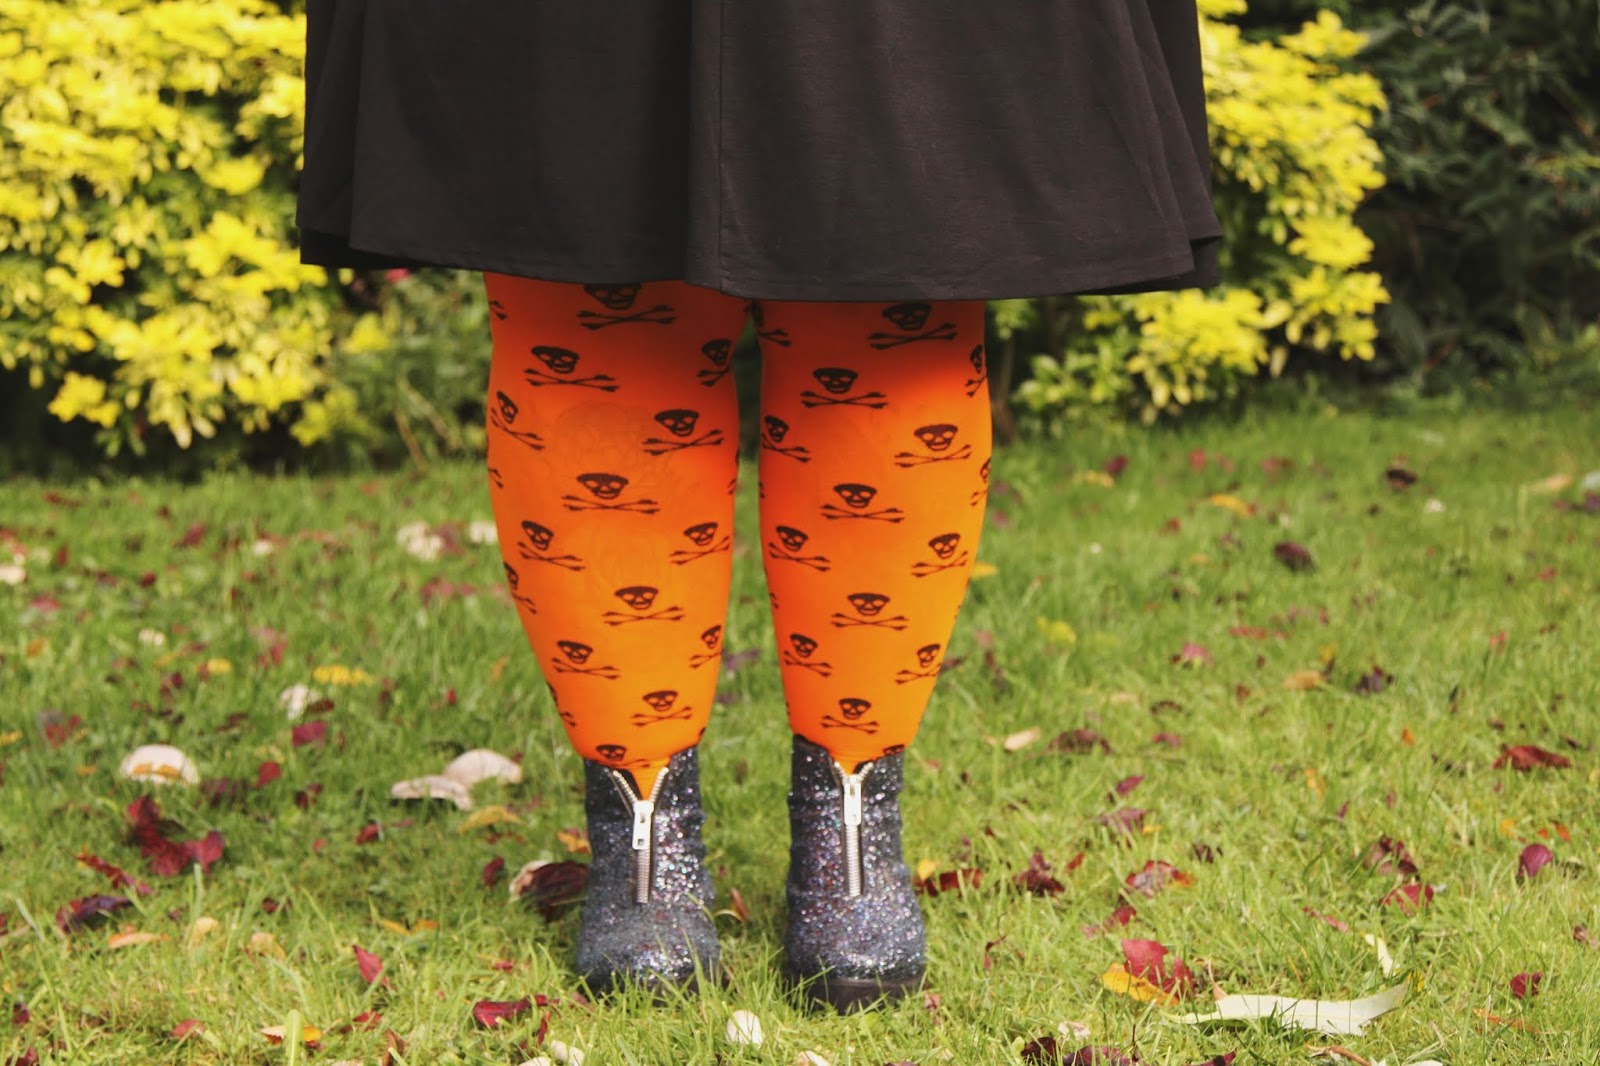 Plus Size Clothing Review: Snag Tights – Forty Fat and Fabulous